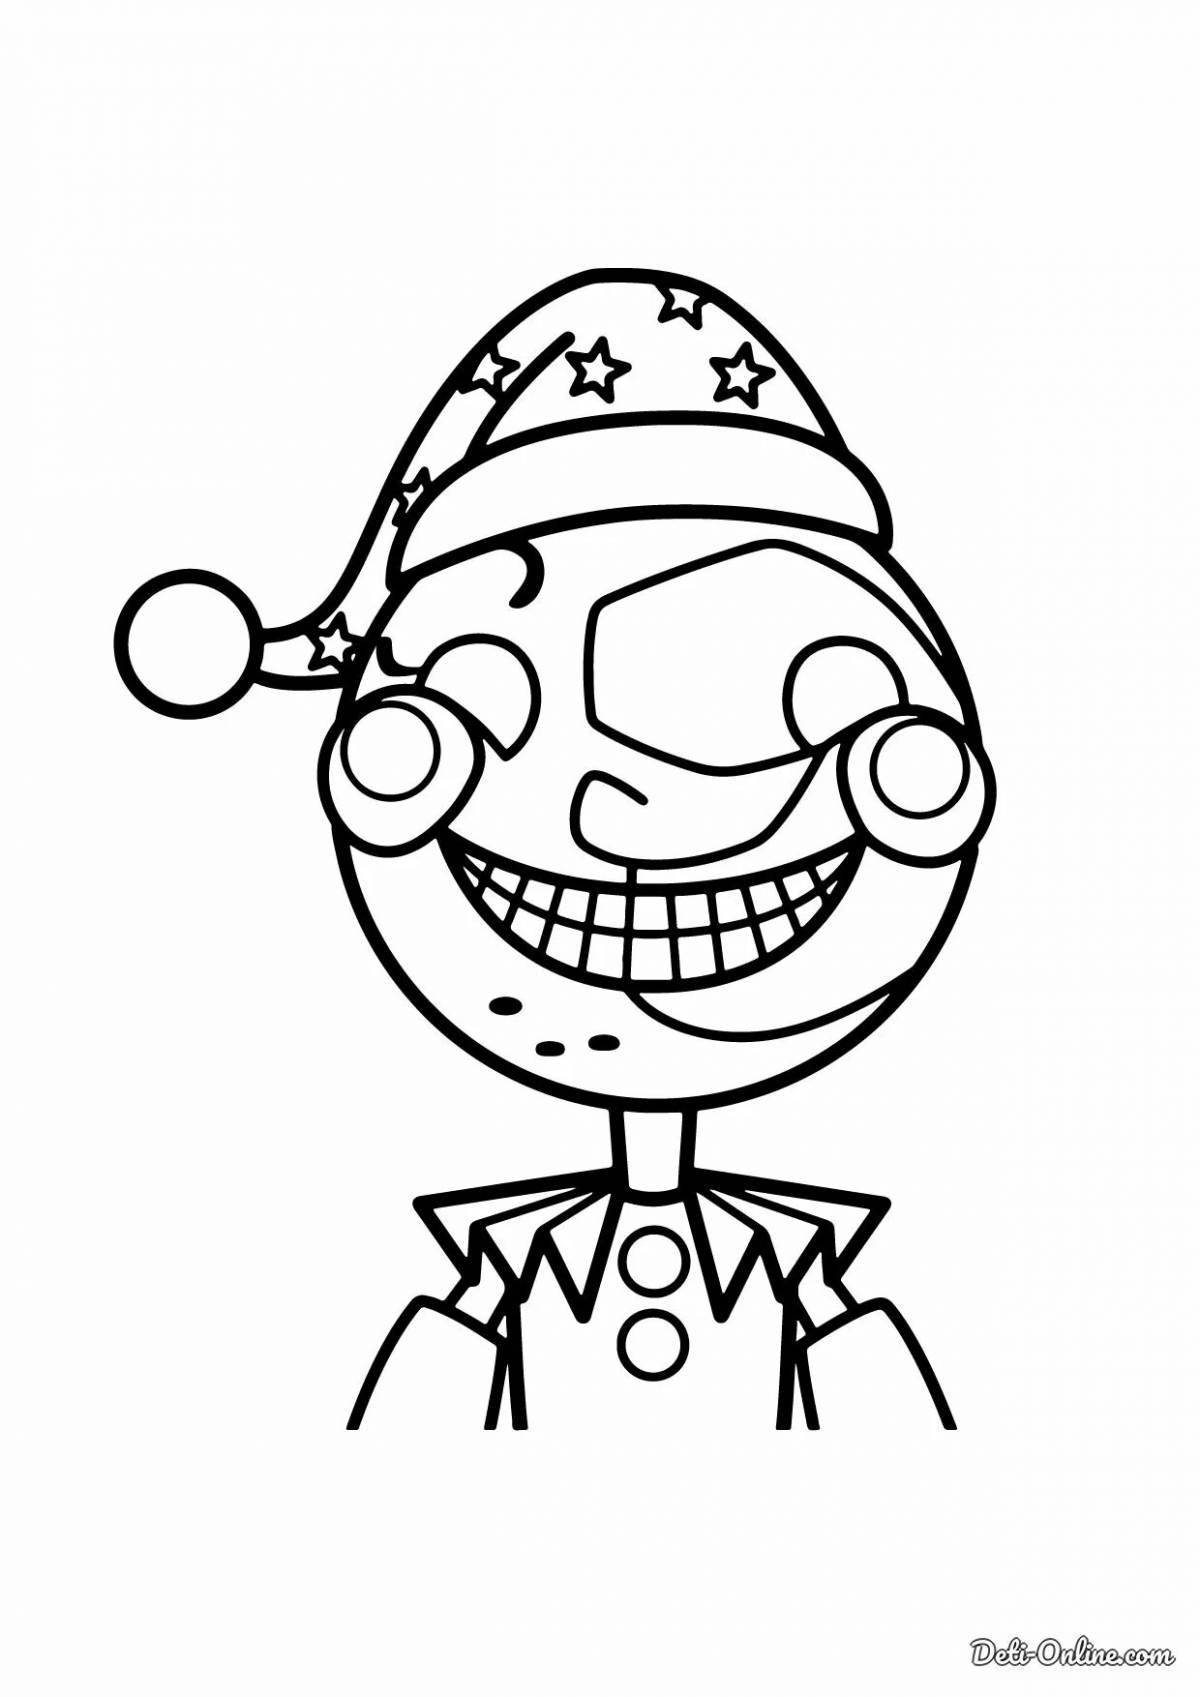 Charming fnaf 9 coloring book for boys